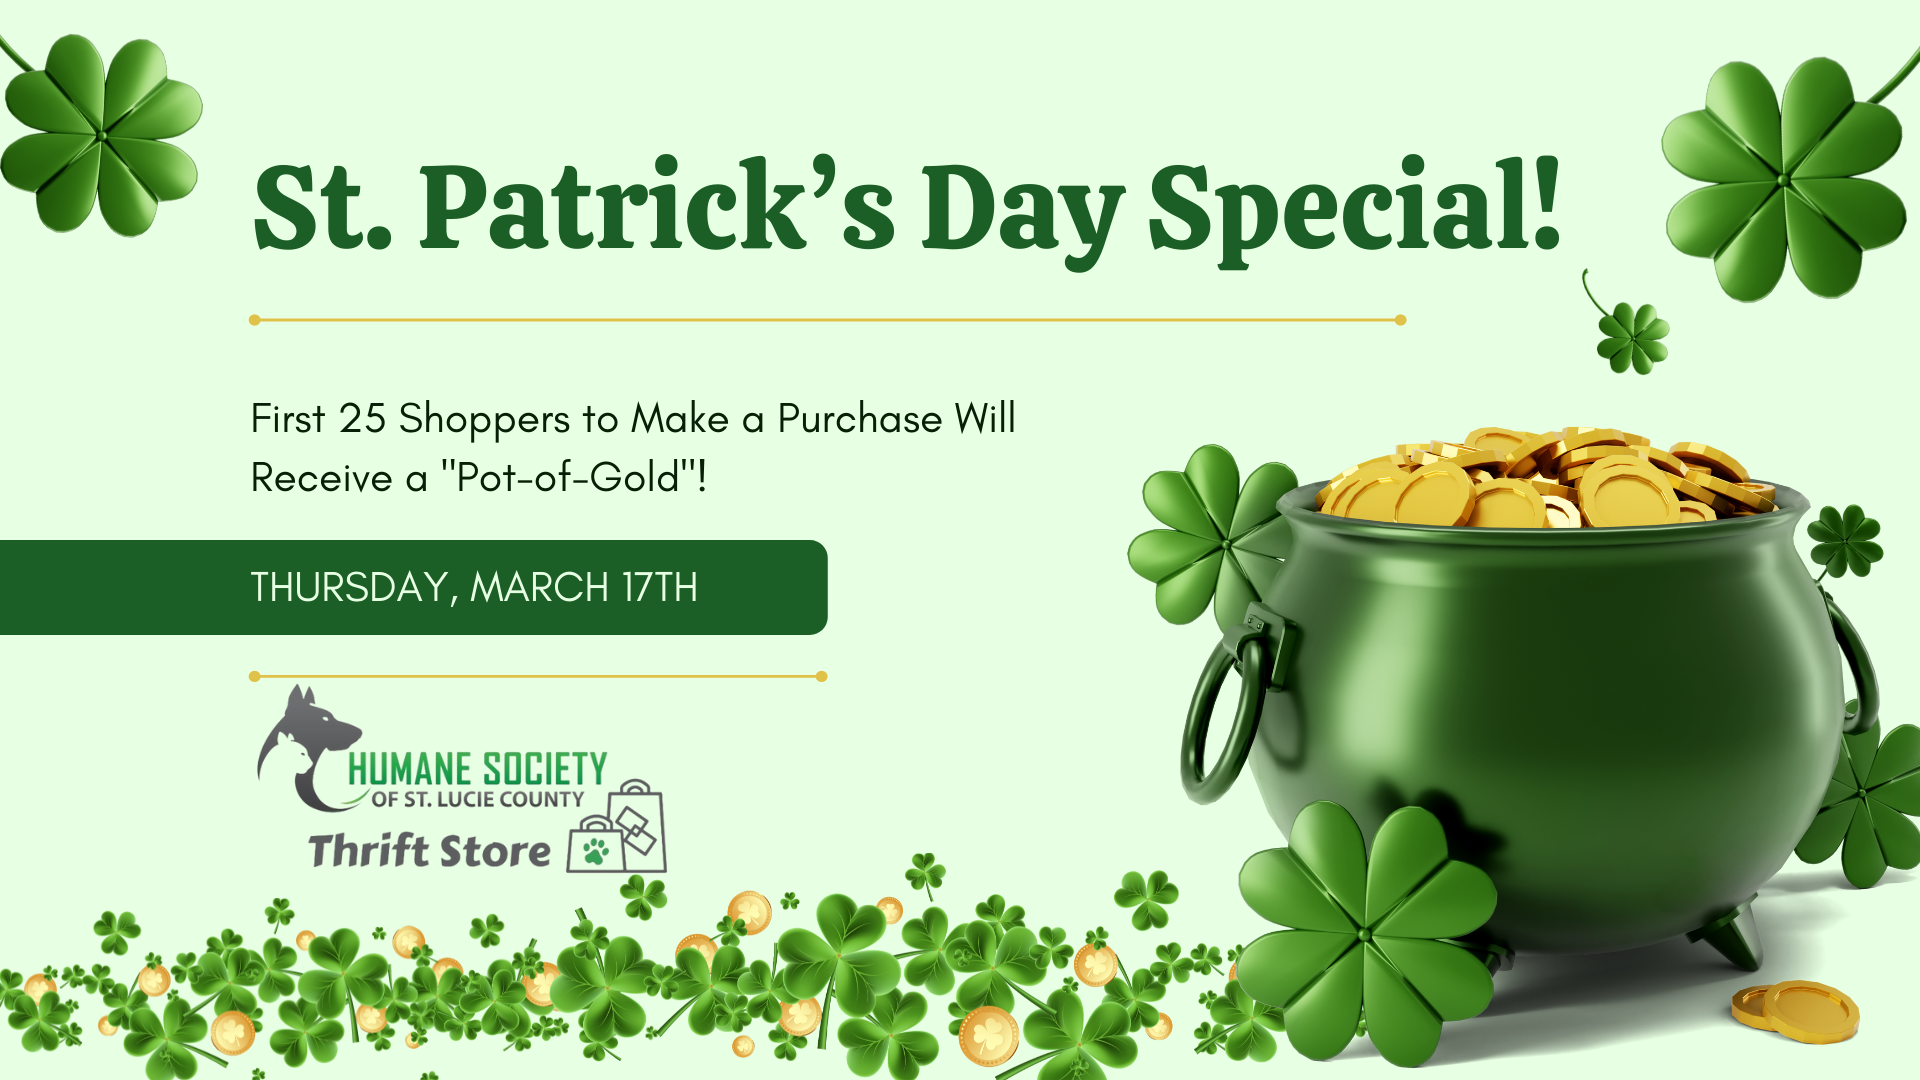 St. Patrick's Day Special